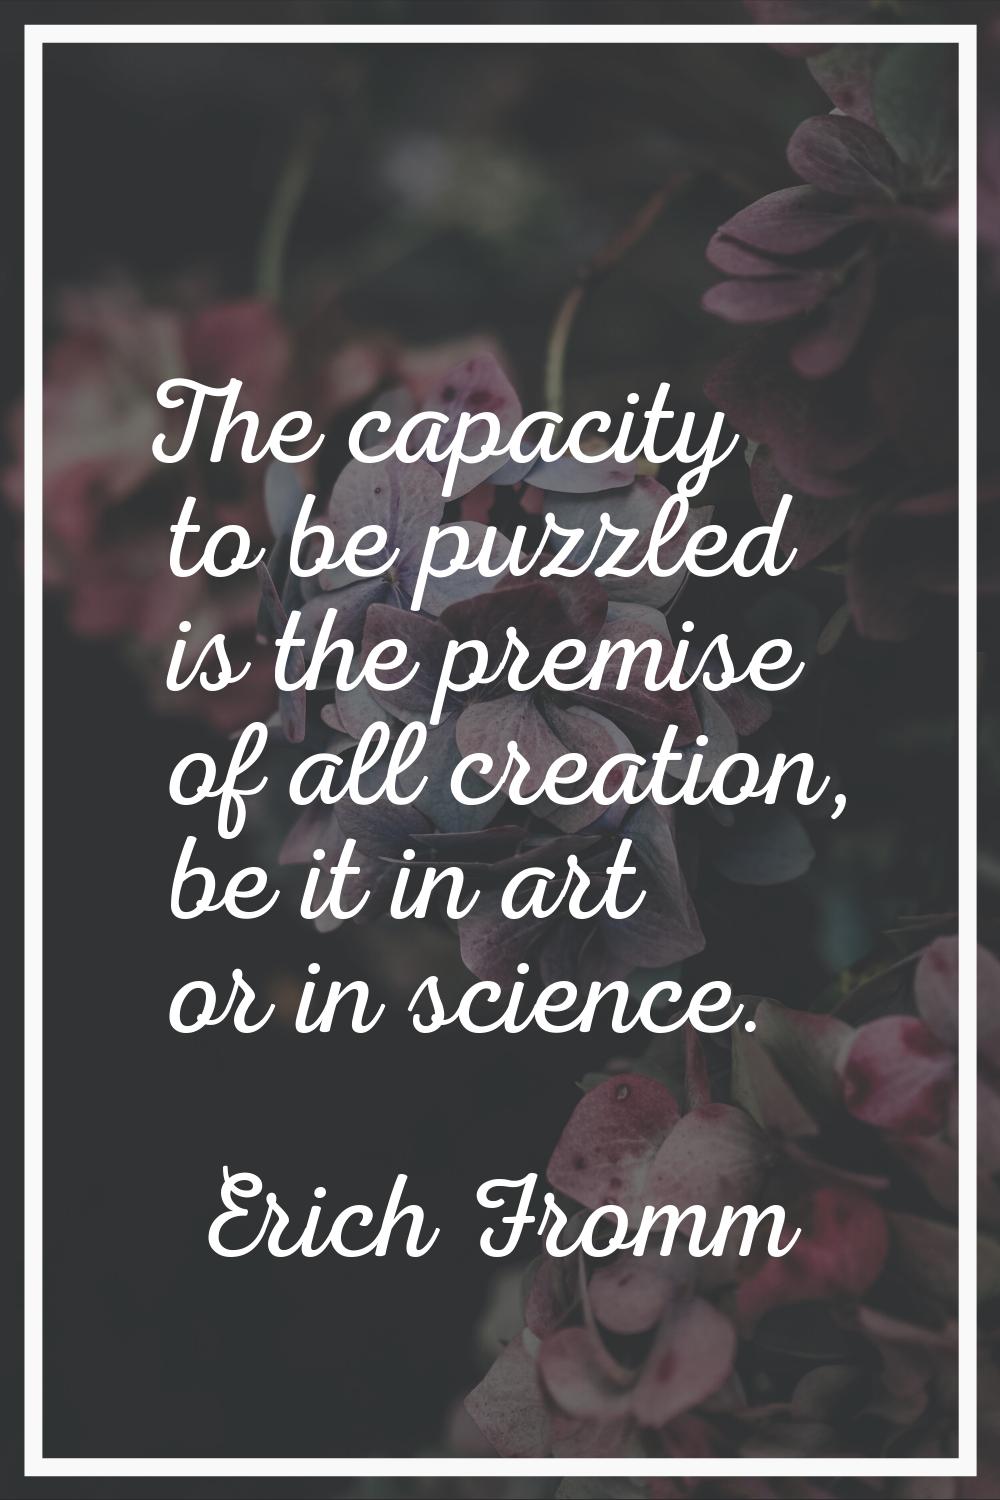 The capacity to be puzzled is the premise of all creation, be it in art or in science.